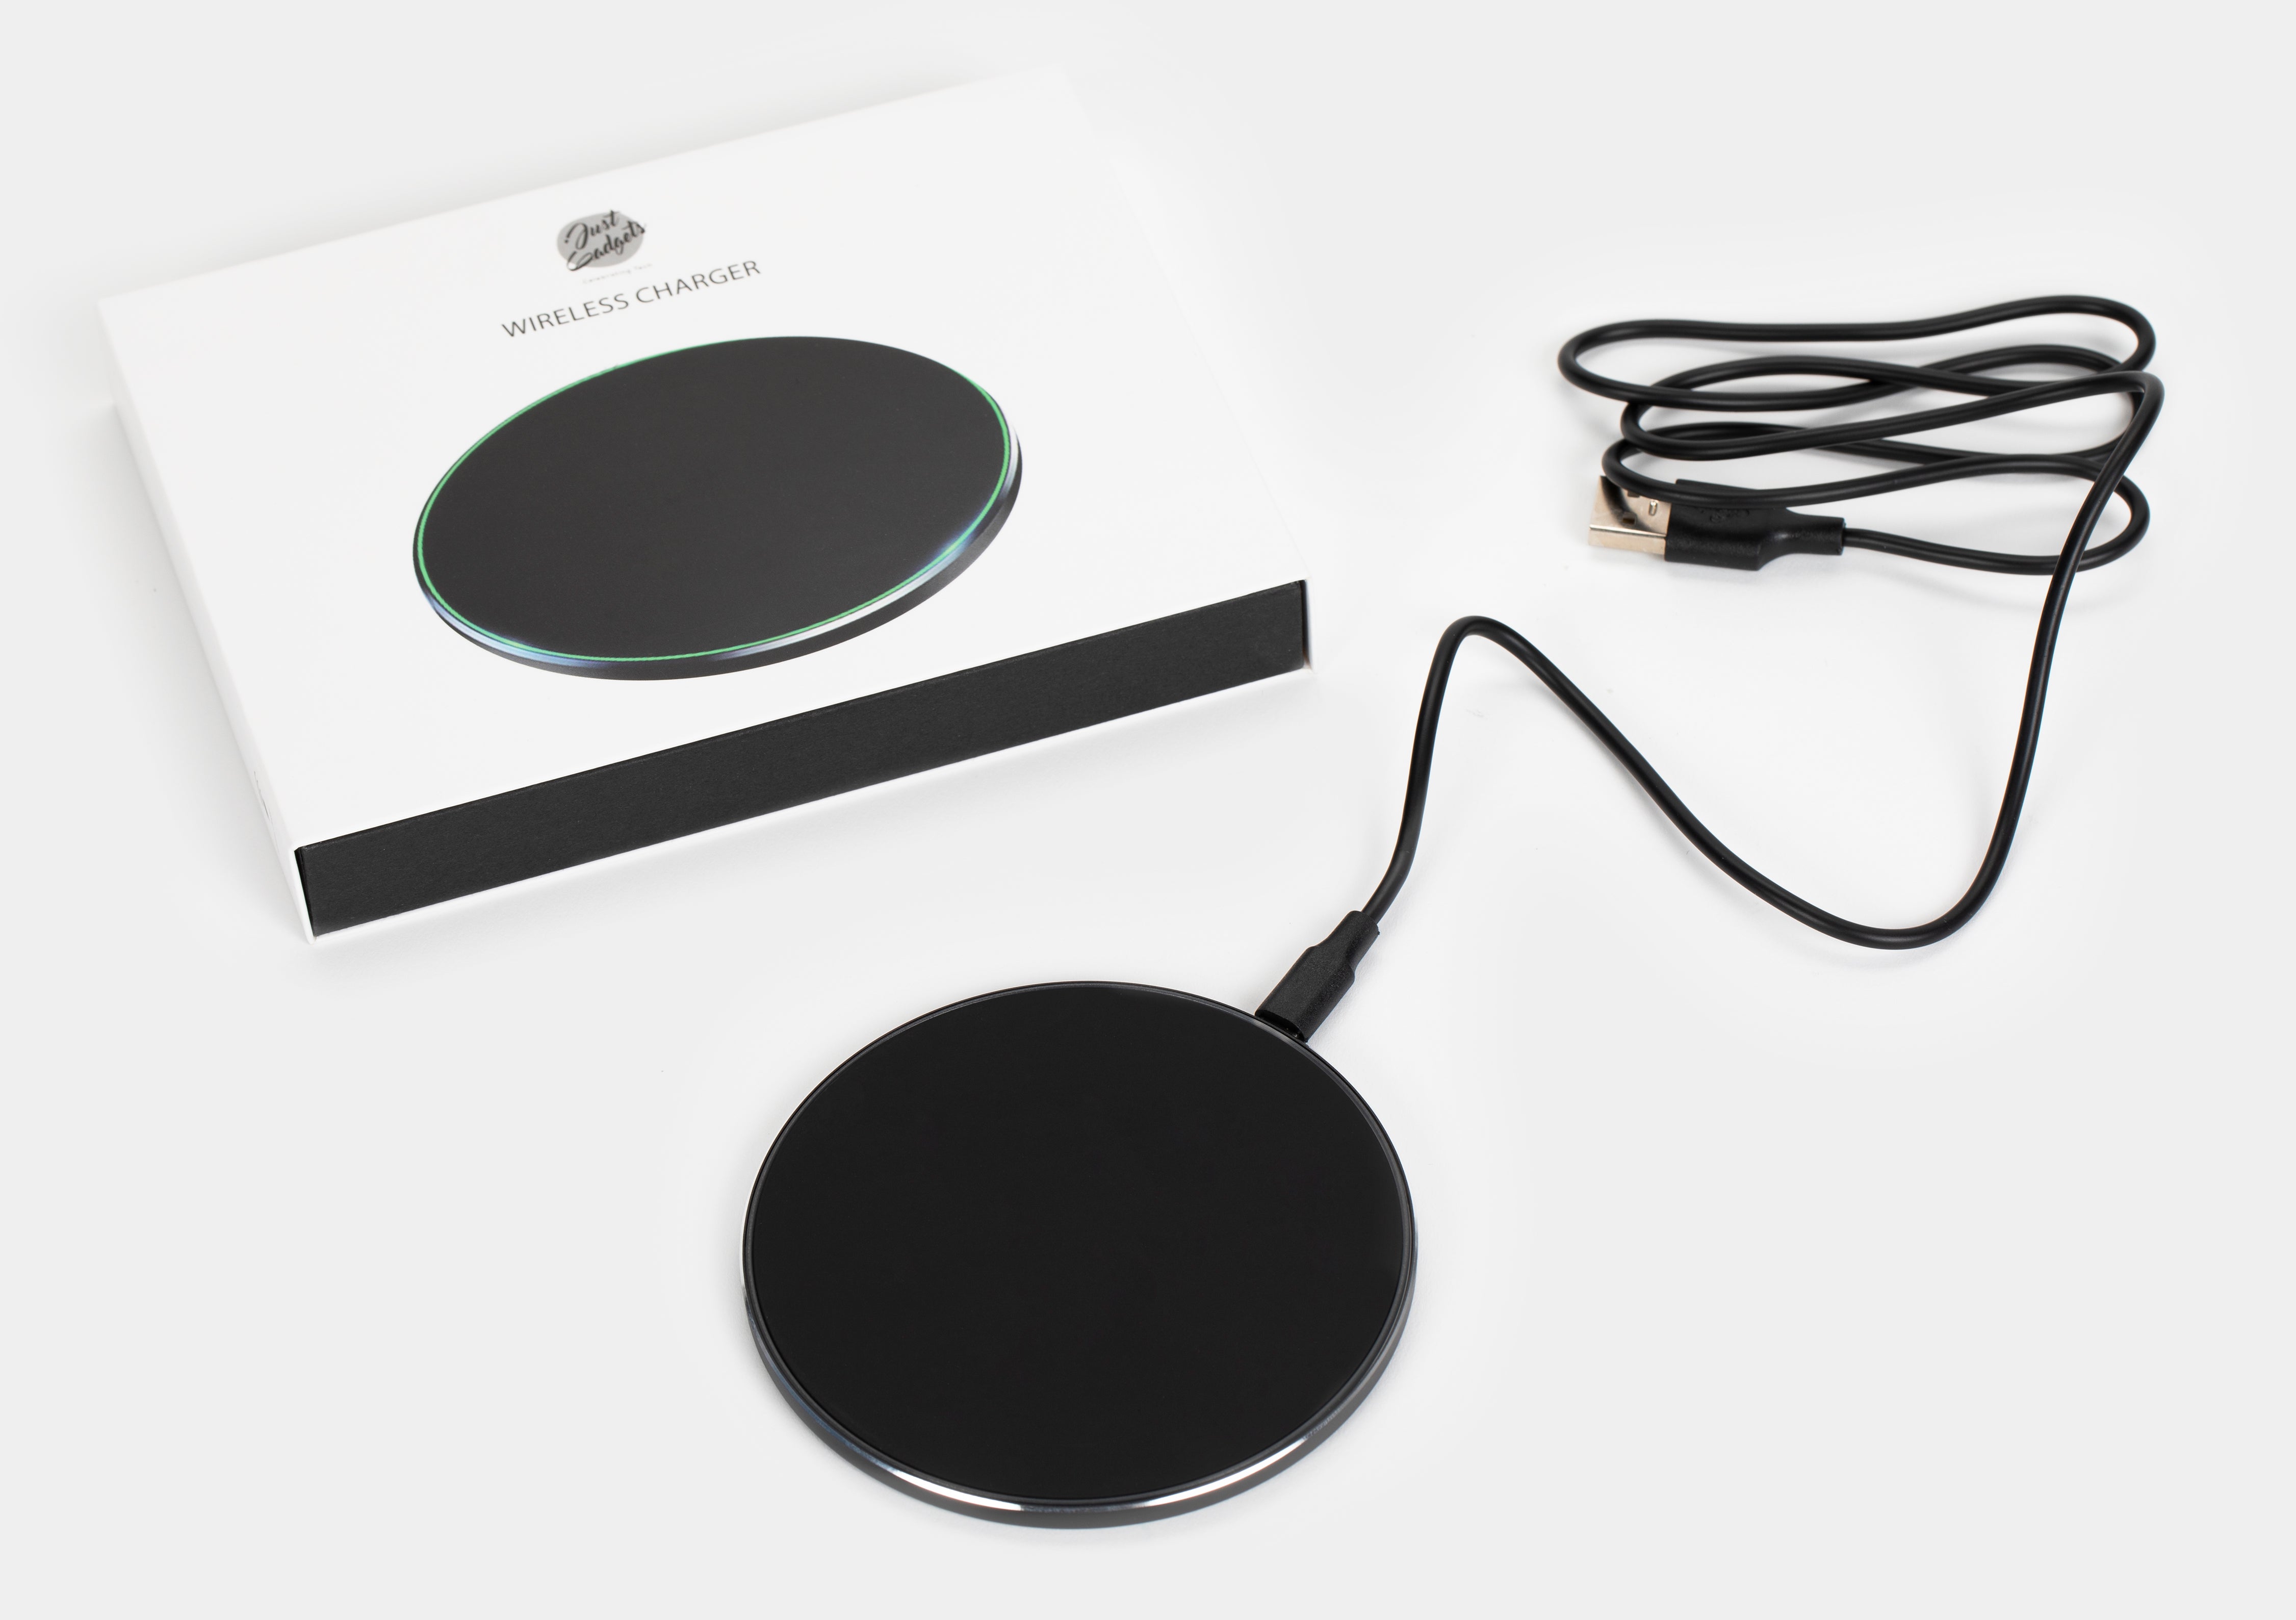 Wireless Black Charger & Bedside Lamp